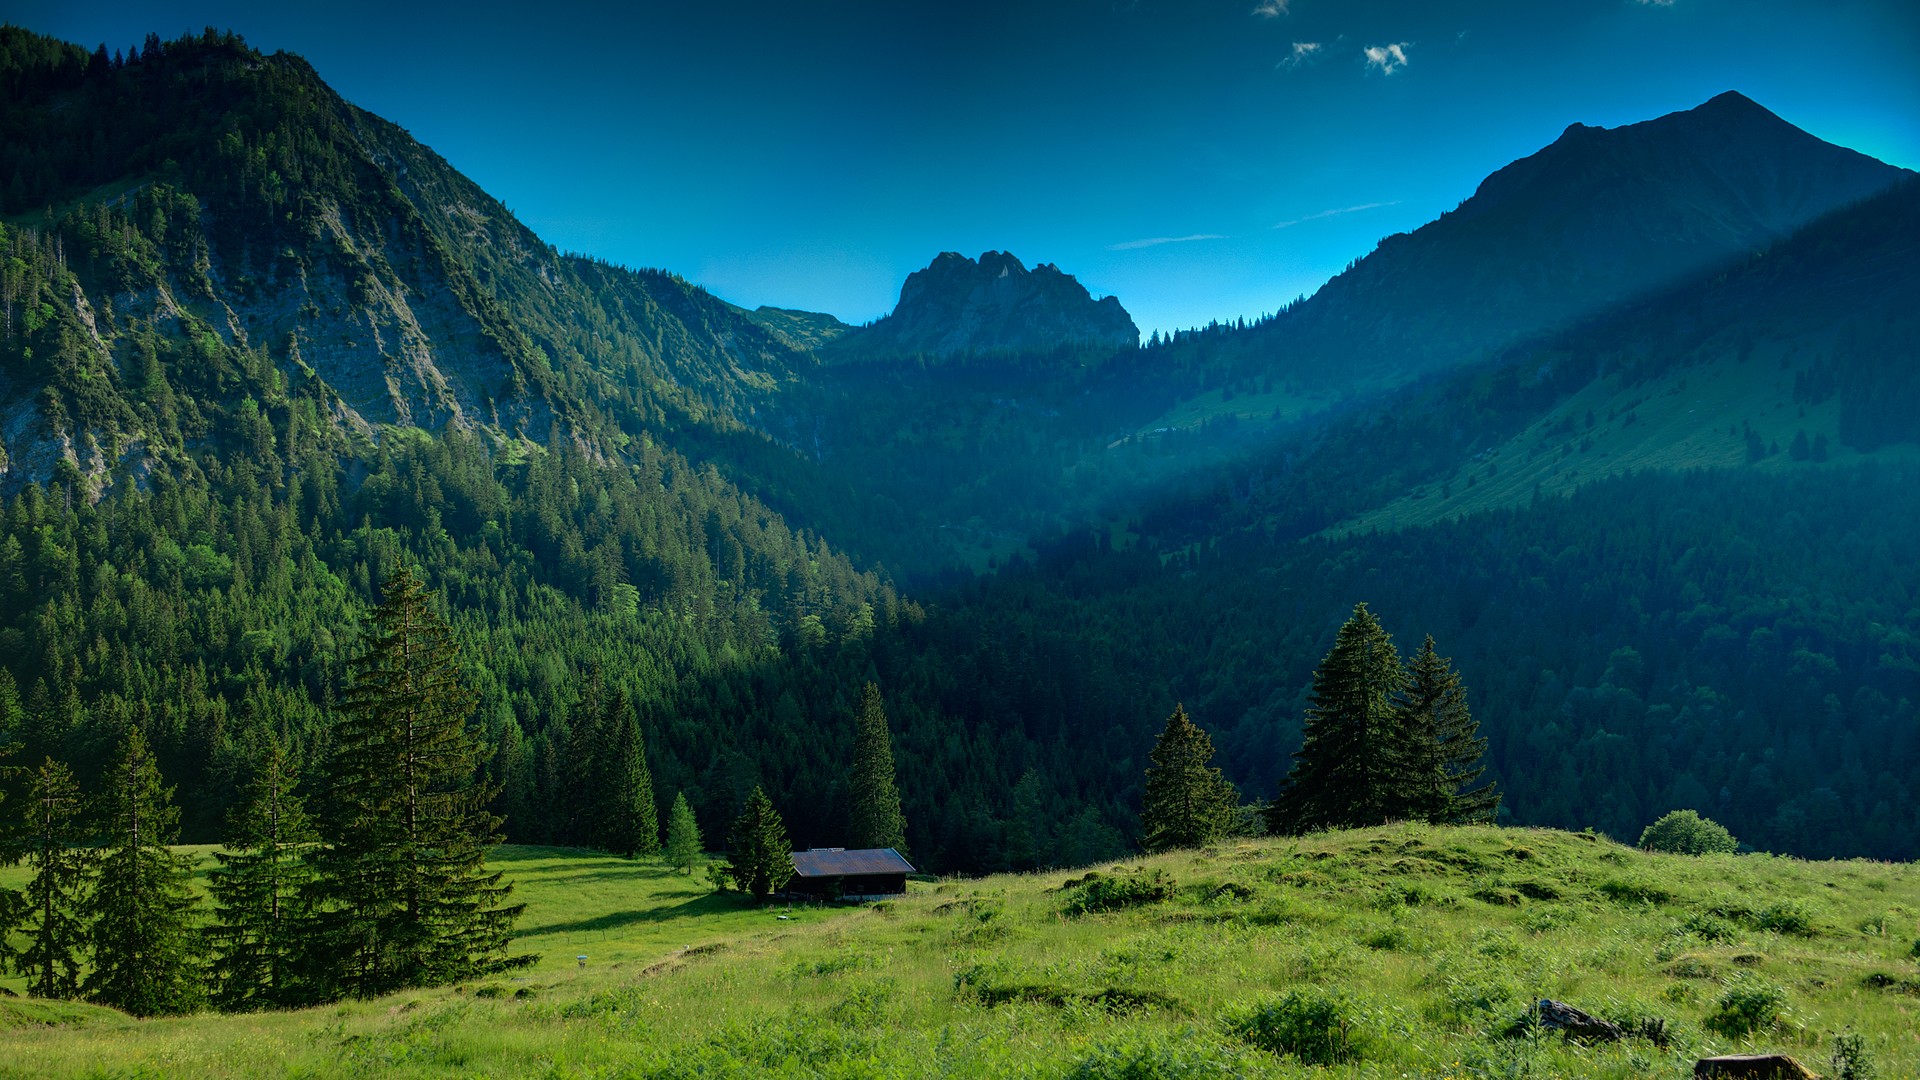 General 1920x1080 landscape nature valley trees pine trees mountains forest sunlight field cabin